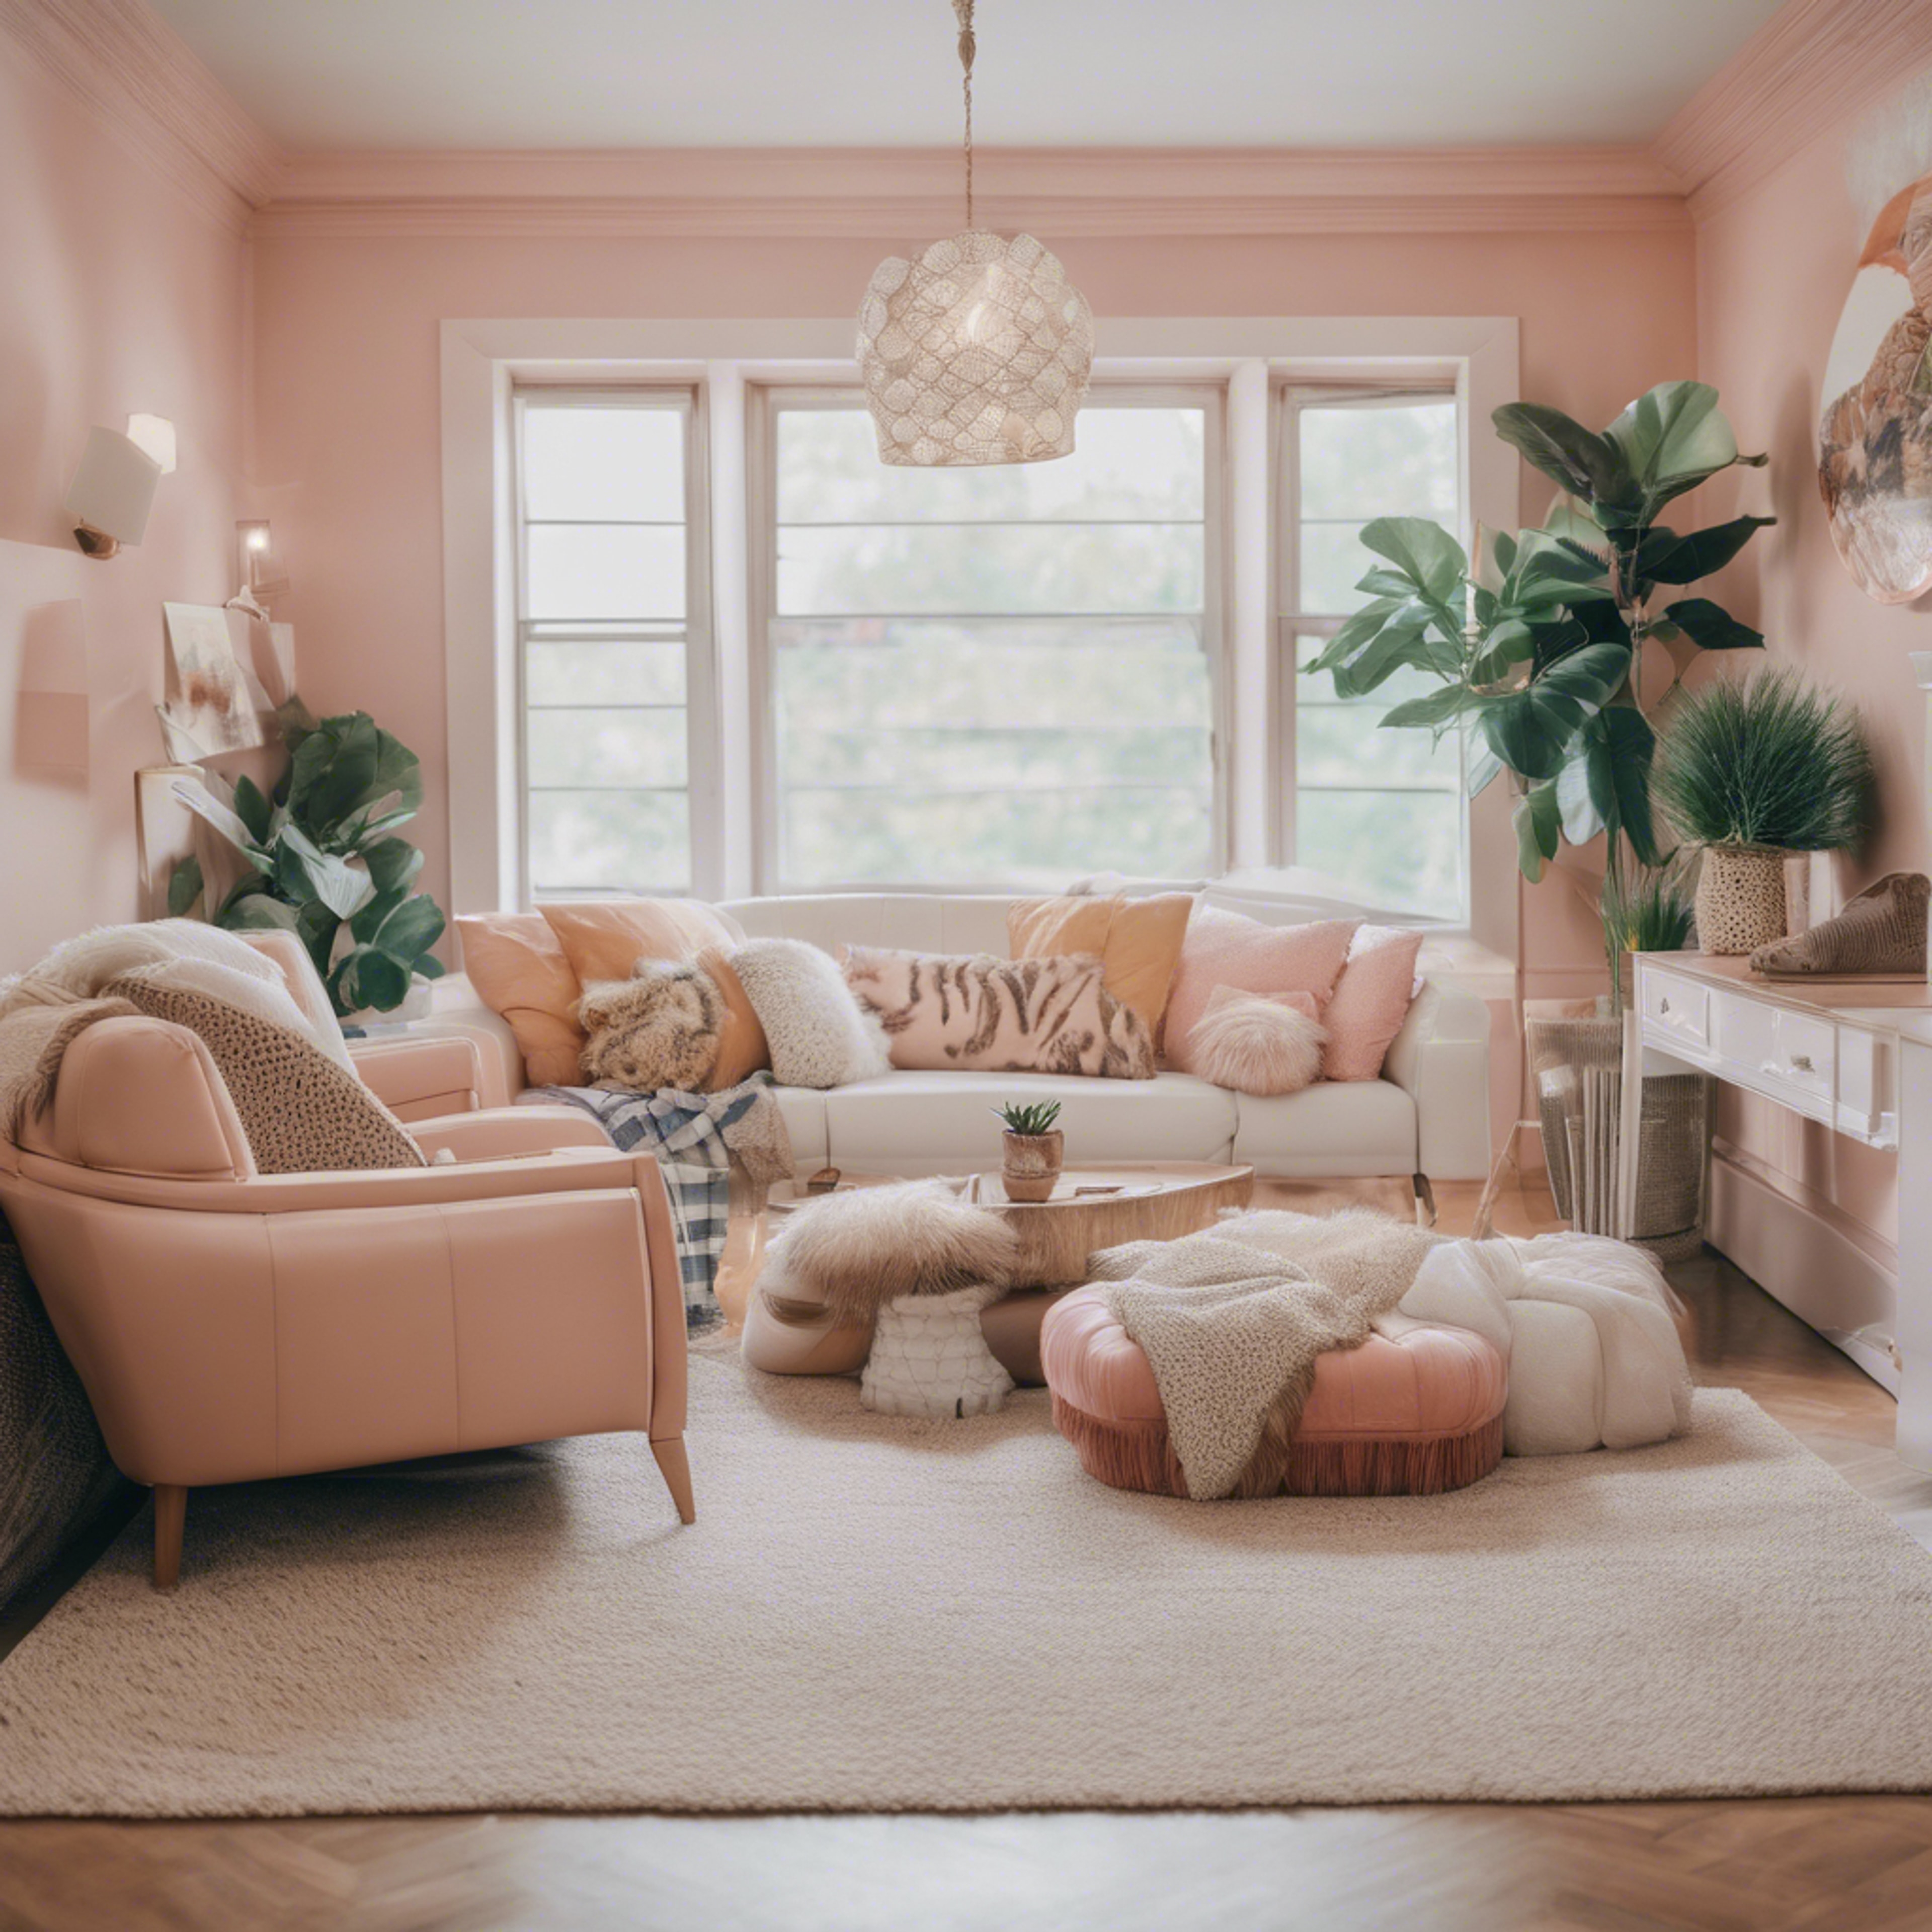 A tastefully decorated preppy aesthetic interior with animal prints, plaids, and pastel colors. Валлпапер[013da7e2e0464972ad87]